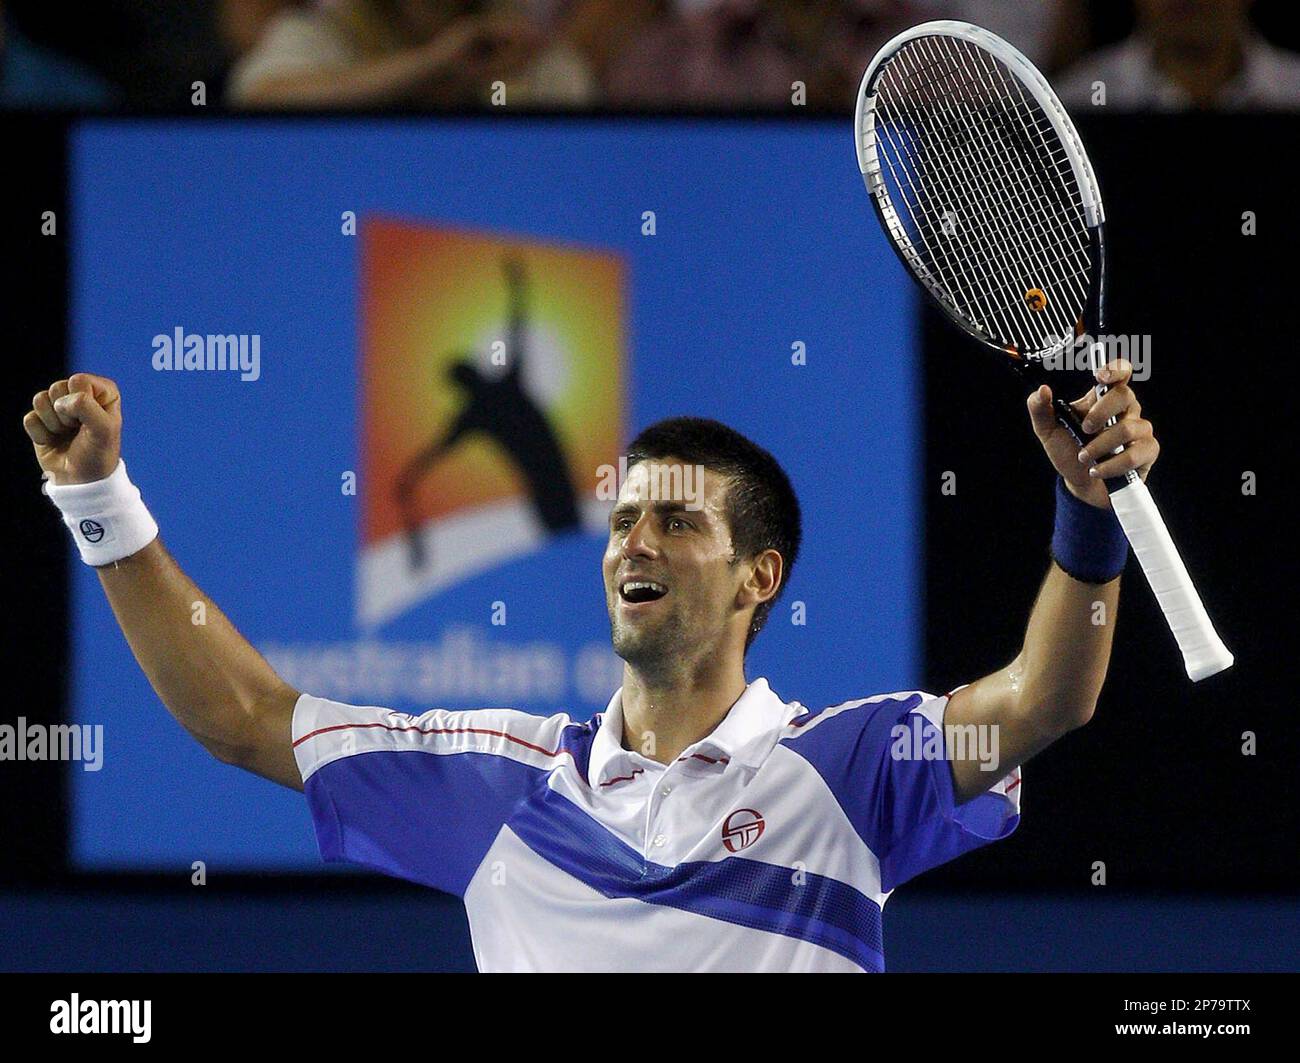 Serbias Novak Djokovic raises his arms in celebration after defeating Britains Andy Murray in the mens singles final at the Australian Open tennis championships in Melbourne, Australia, Sunday, Jan